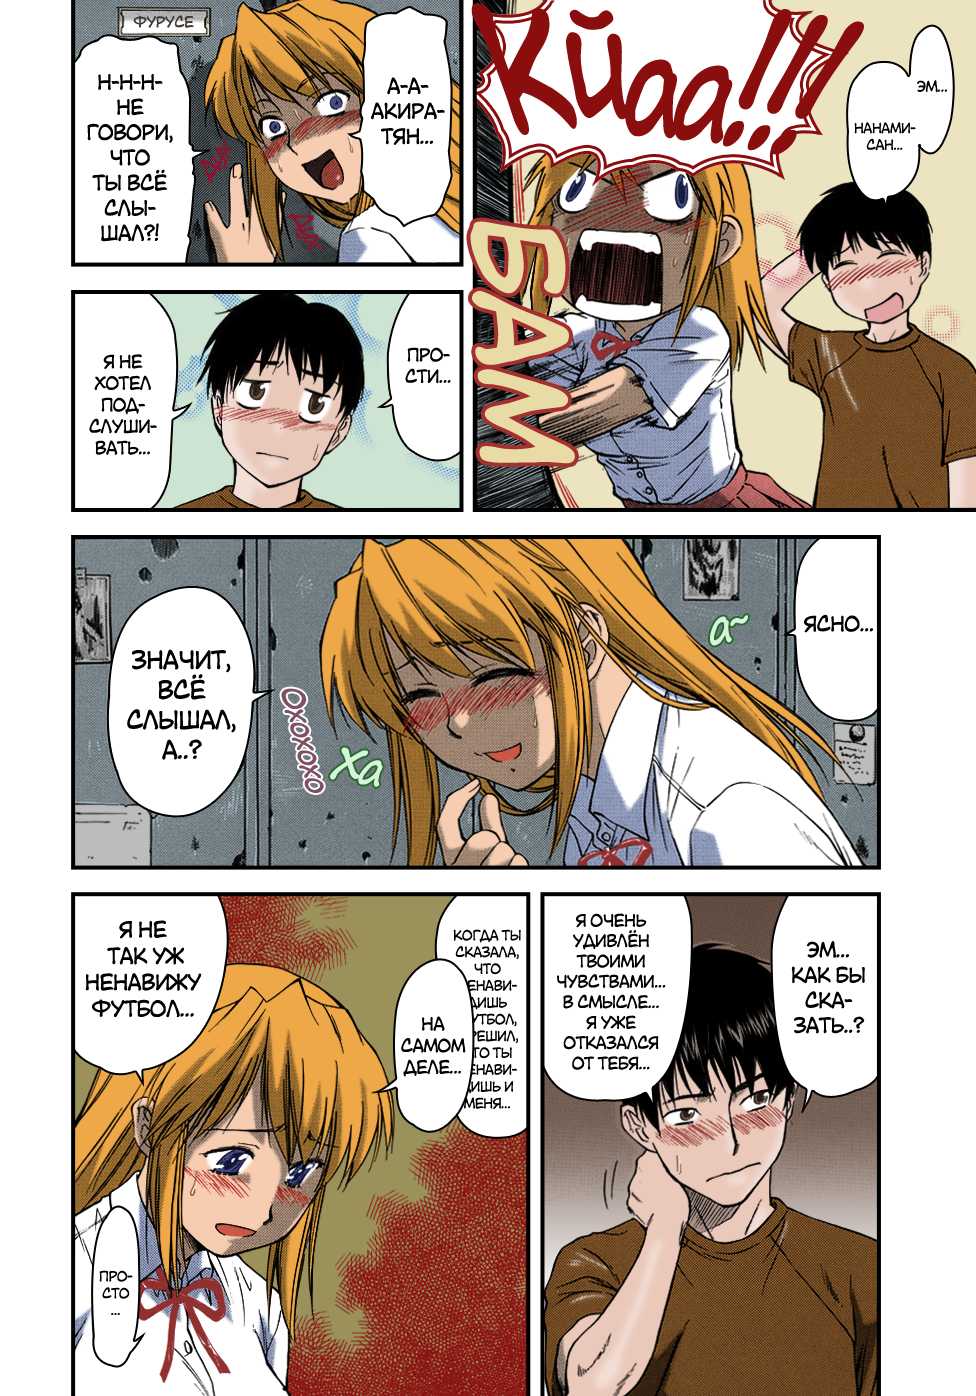 [Nagare Ippon] Offside Girl Ch. 1-5 [Russian] [Colorized] [Decensored] [WIP] - Page 15